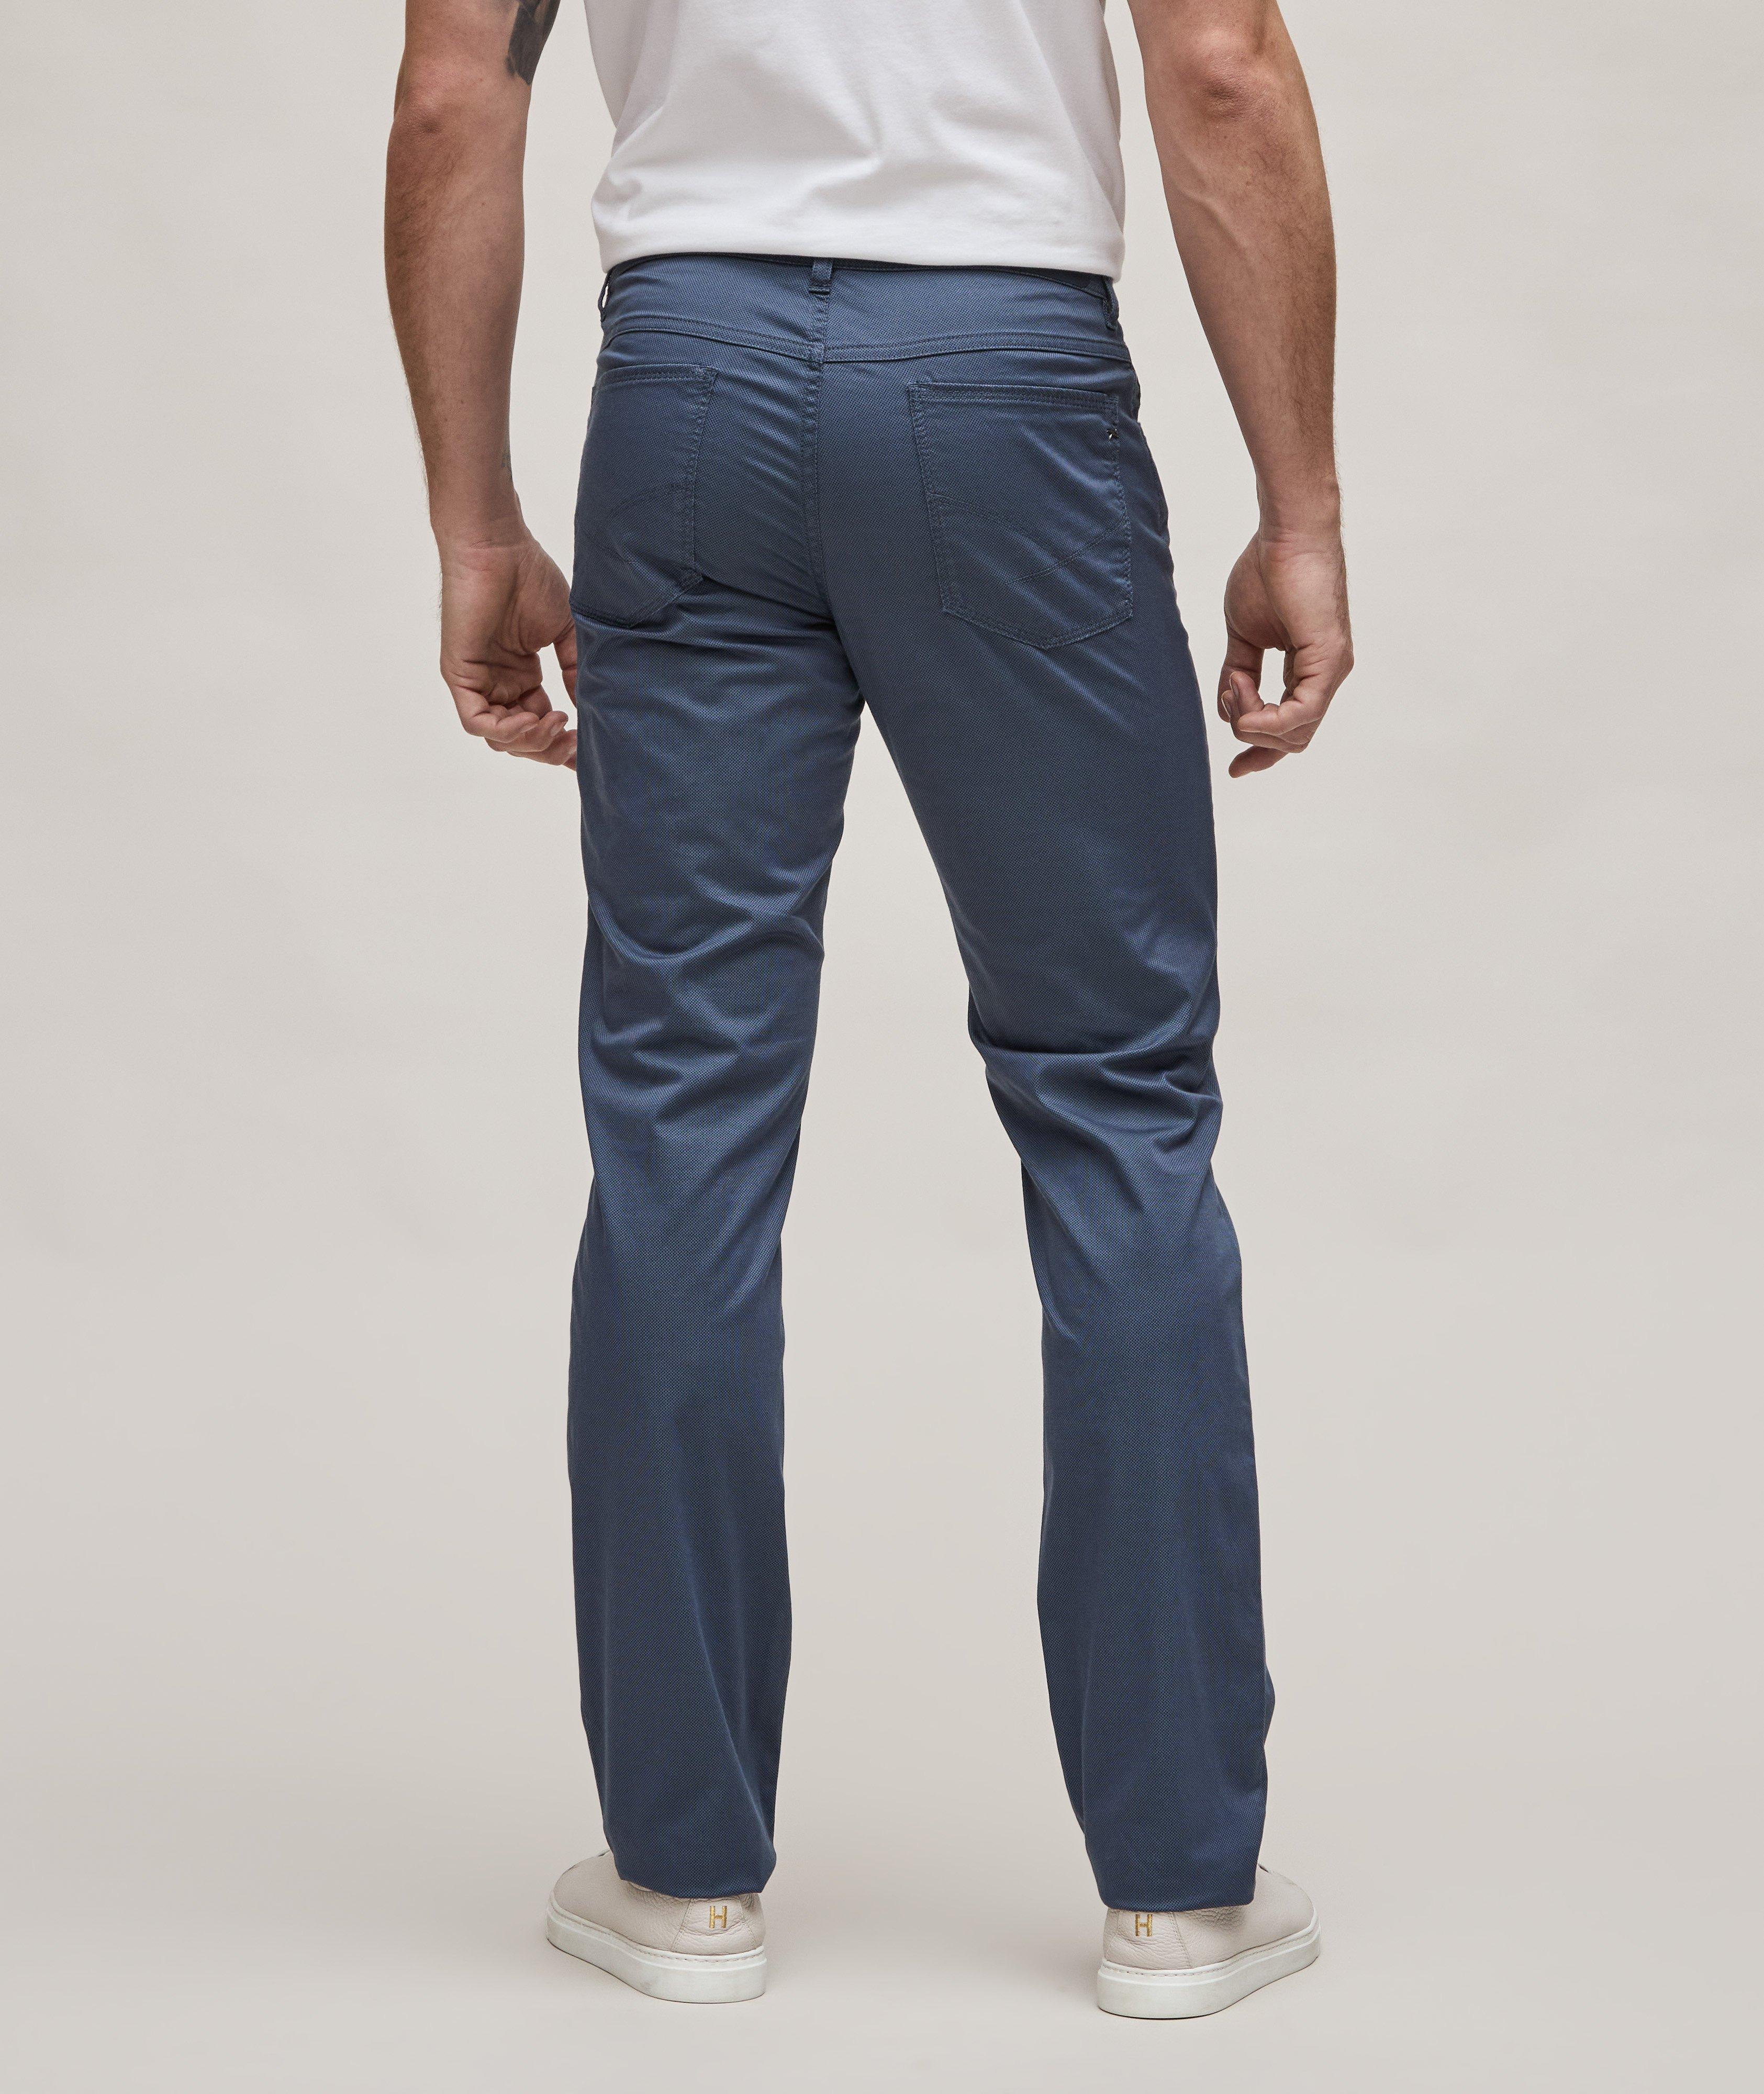 Cooper Ultralight Neat Sustainable Stretch-Cotton Pants